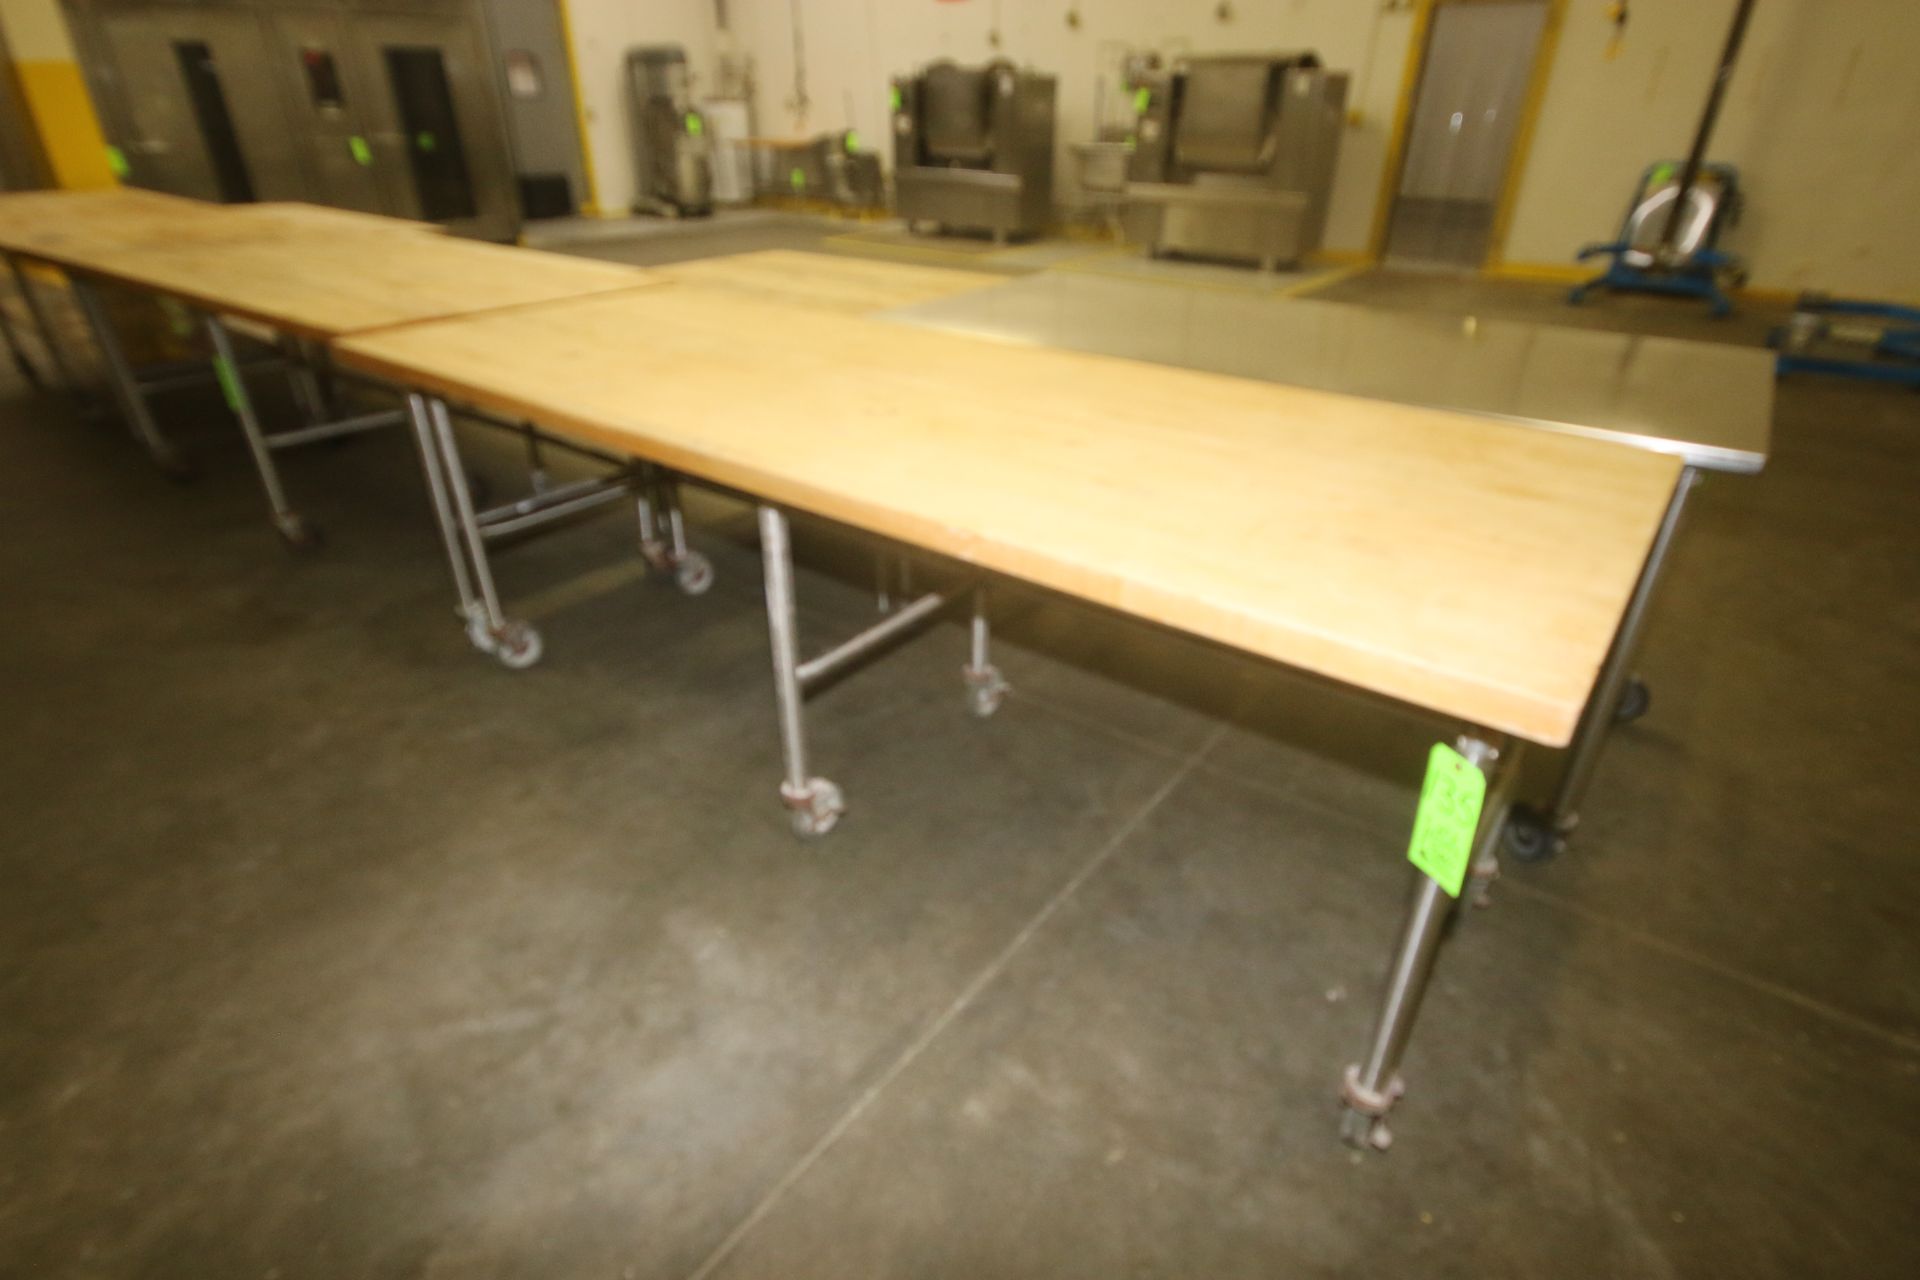 Wooden Top Baking Tables, with S/S Portable Frames & Legs, Overall Dims.: All (3) Aprox. 96" L x - Image 2 of 3